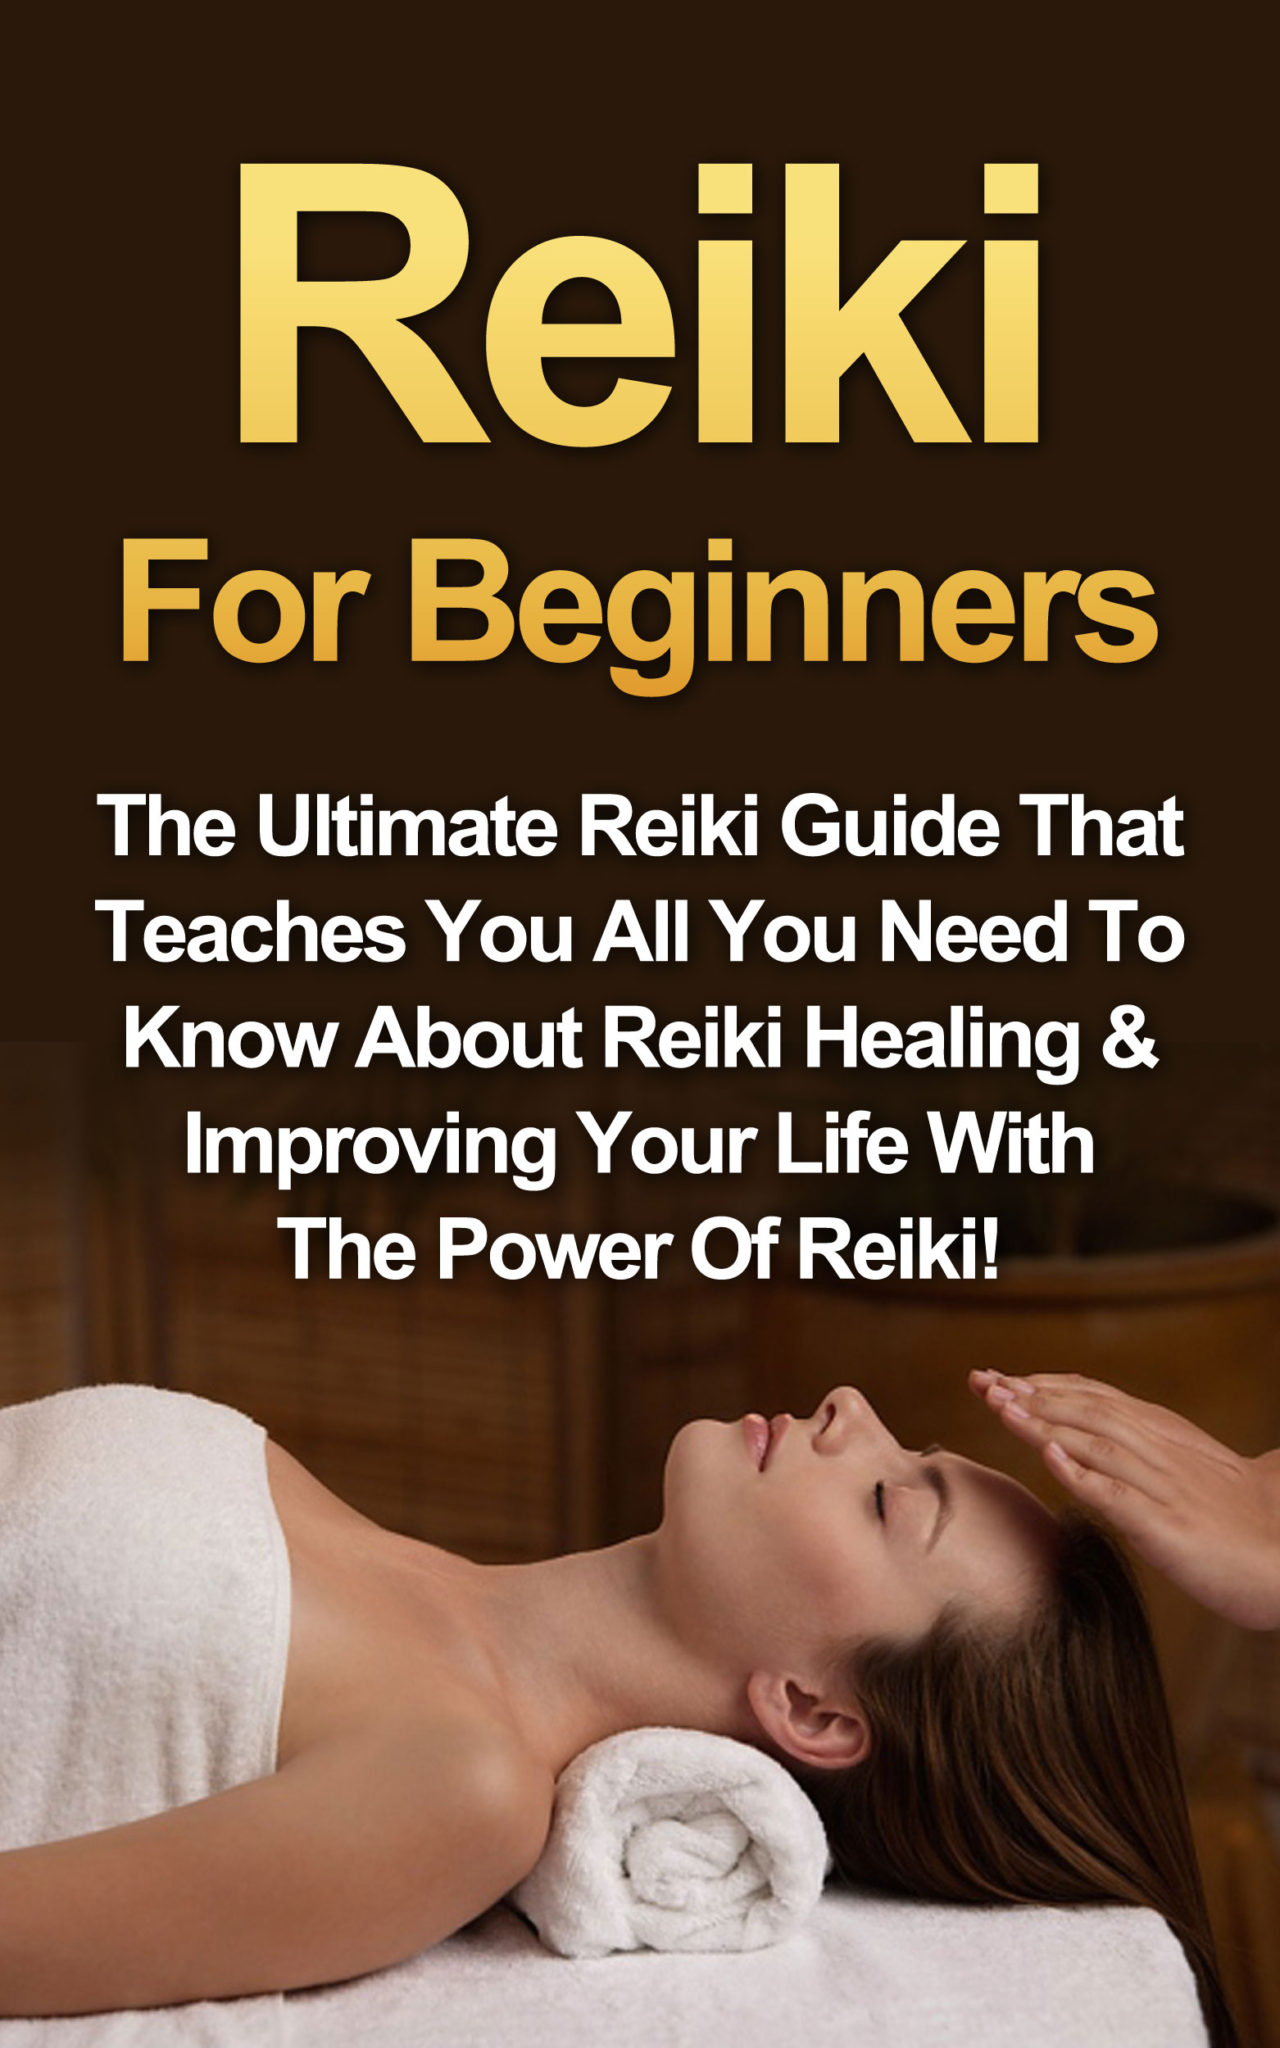 FREE: Reiki: Reiki For Beginners: The Ultimate Reiki Guide That Teaches You All You Need To Know About Reiki Healing & Improving Your Life With The Power Of Reiki! by Amber Rainey